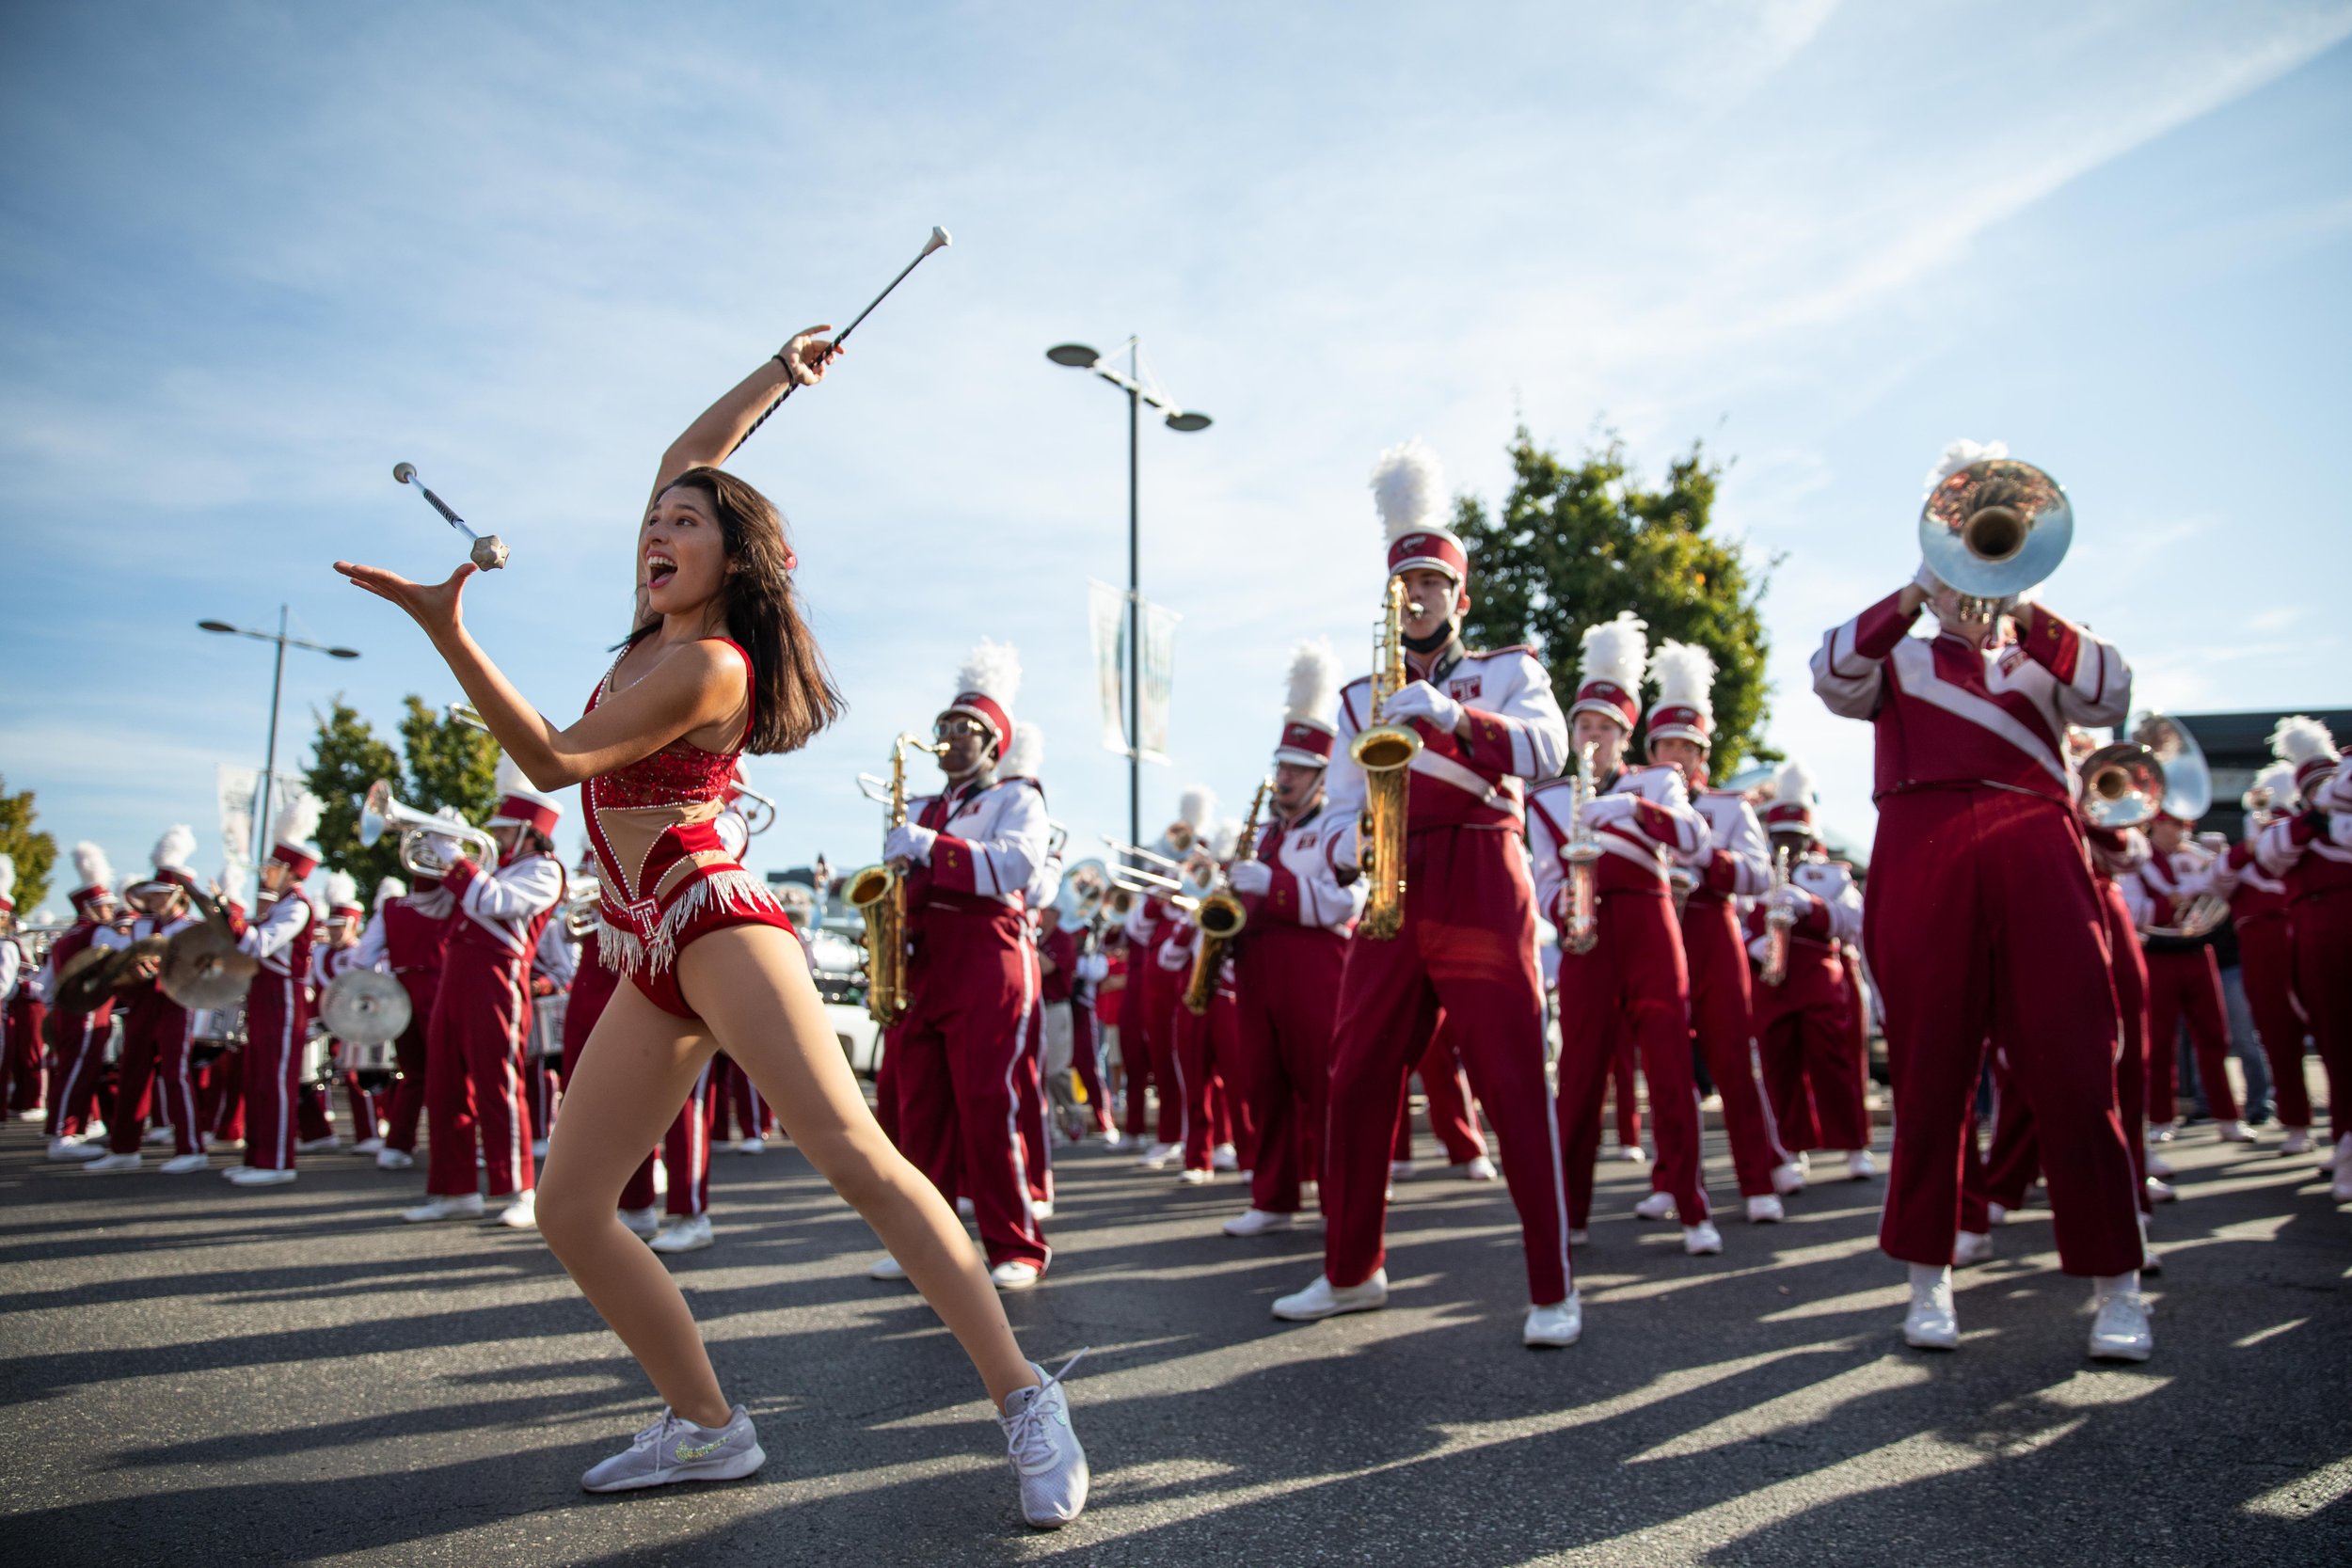   Temple University's marching band plays outside of Lincoln Financial Field in Philadelphia before Temple's homecoming game against the University of Memphis on October 2, 2021.  